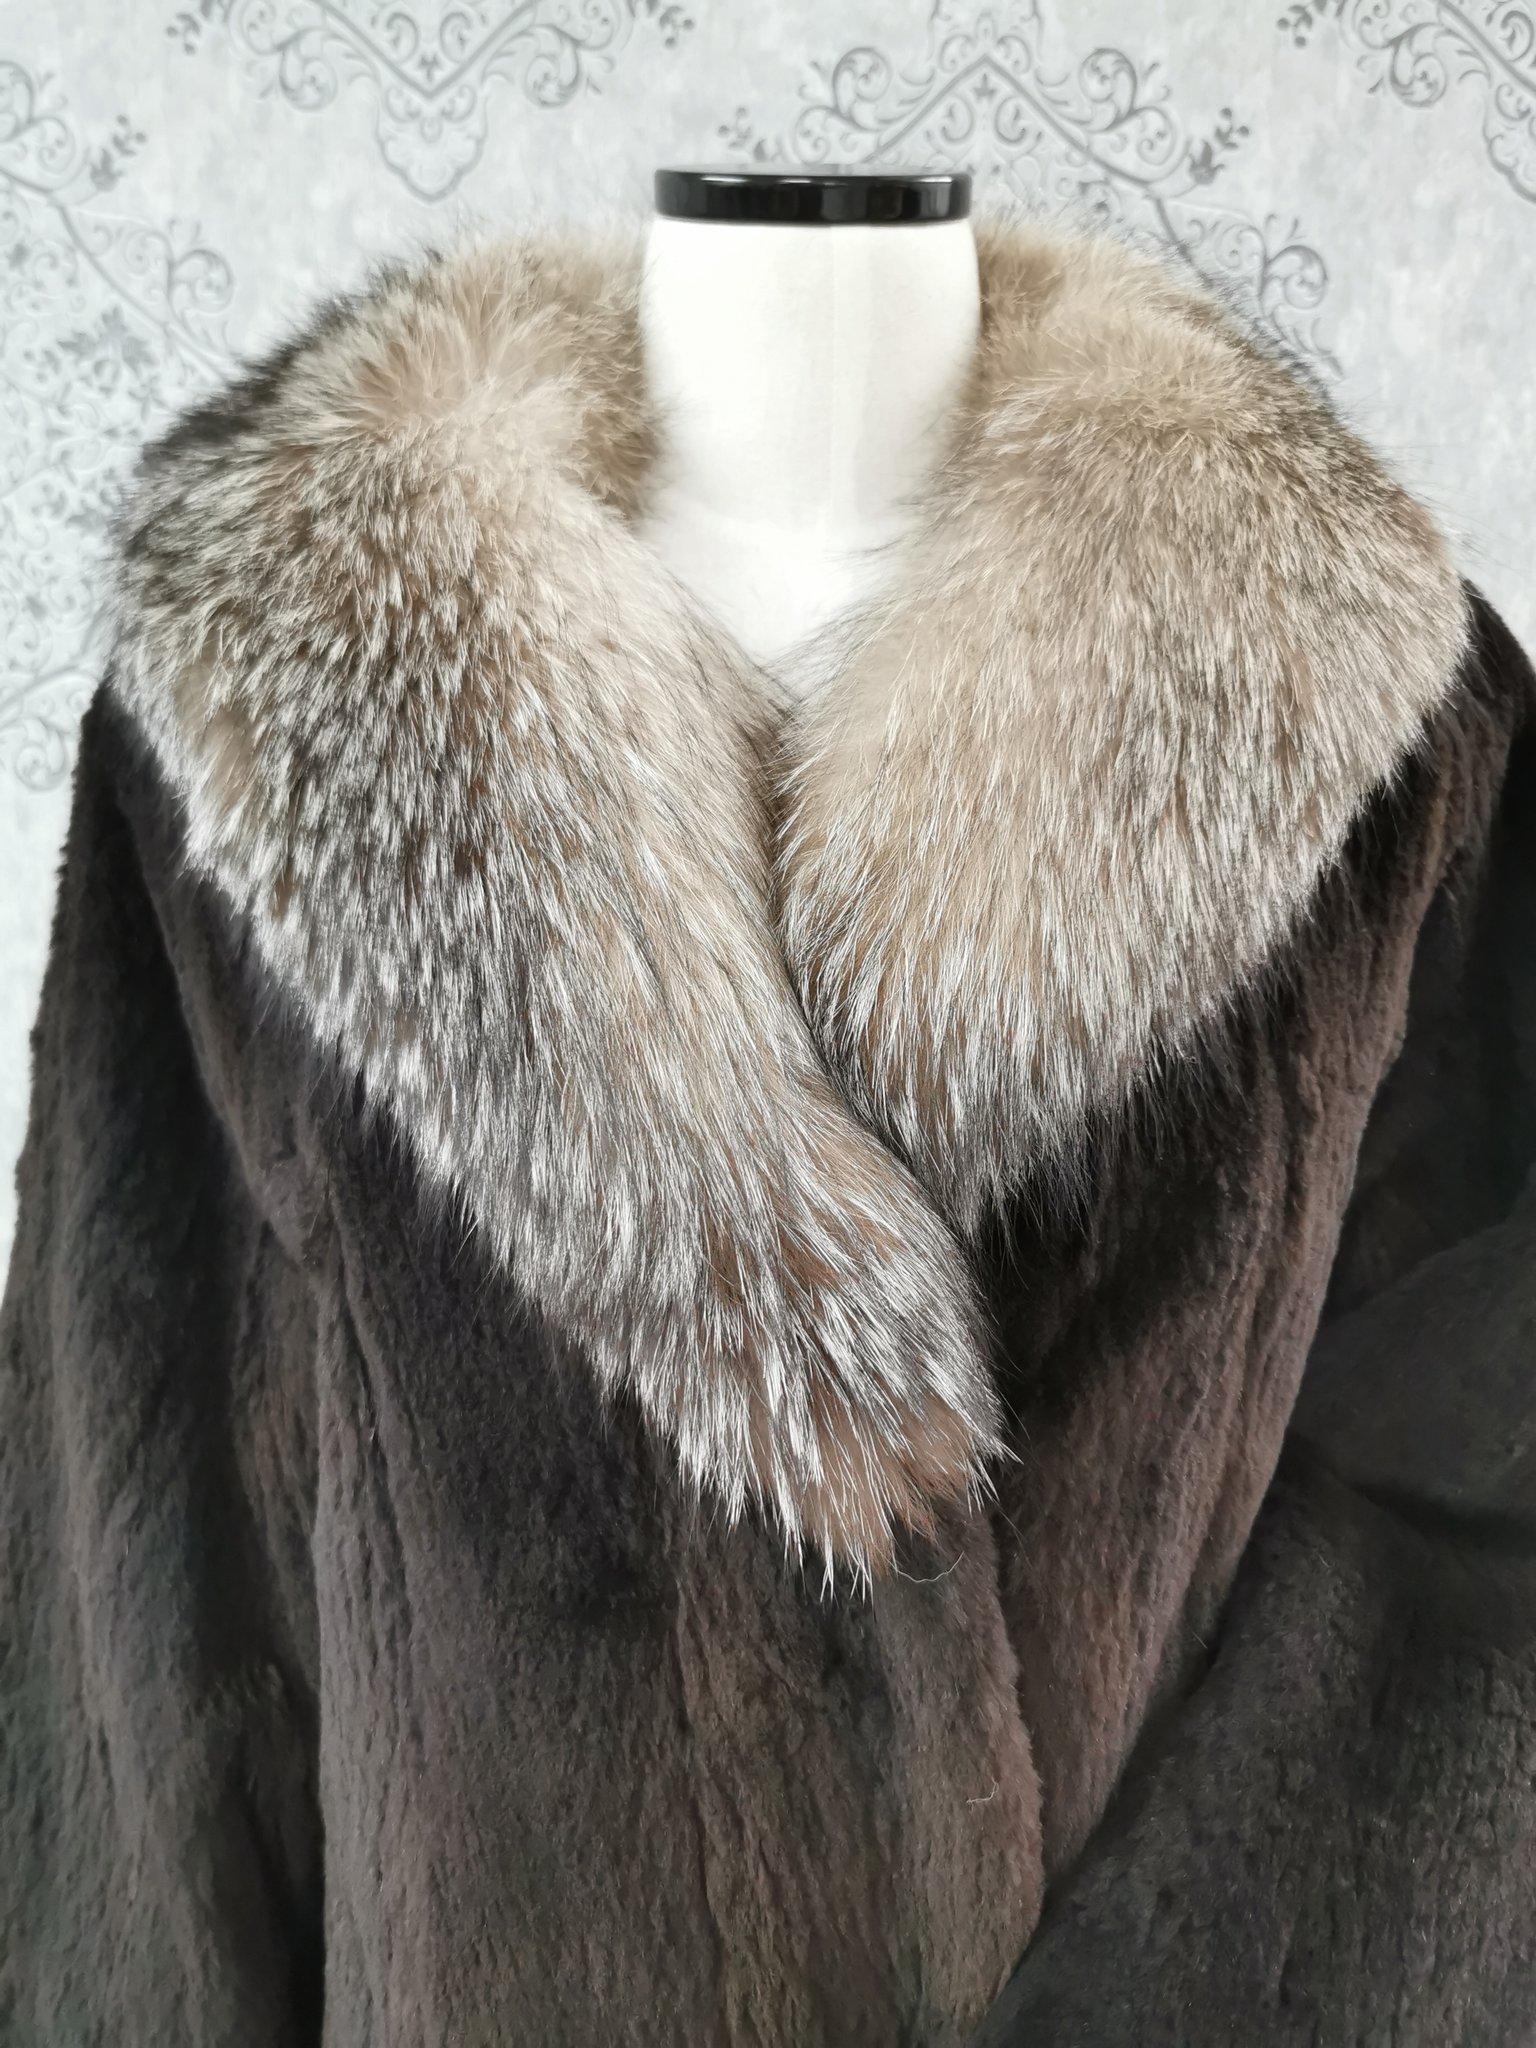 DESCRIPTION :  BRAND NEW SHEARED BEAVER FUR COAT WITH CRYSTAL FOX TRIM SIZE 8

Portrait collar,supple skins, beautiful fresh fur, european german clasps for closure, too slit pockets, nice big full pelts skins in excellent condition.

This item is